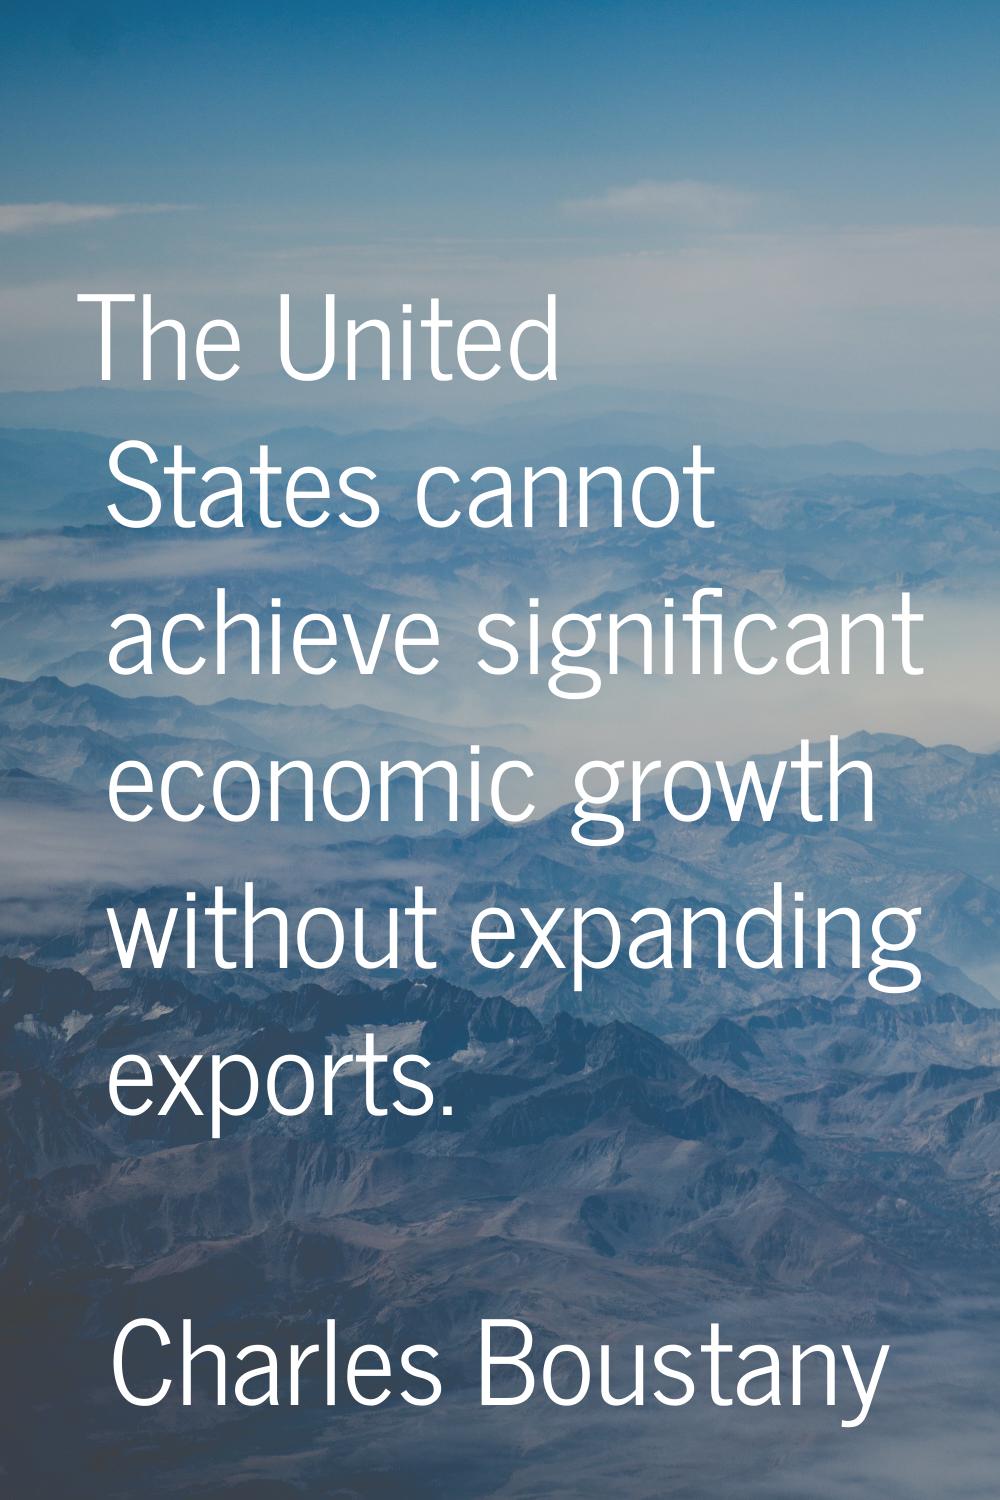 The United States cannot achieve significant economic growth without expanding exports.